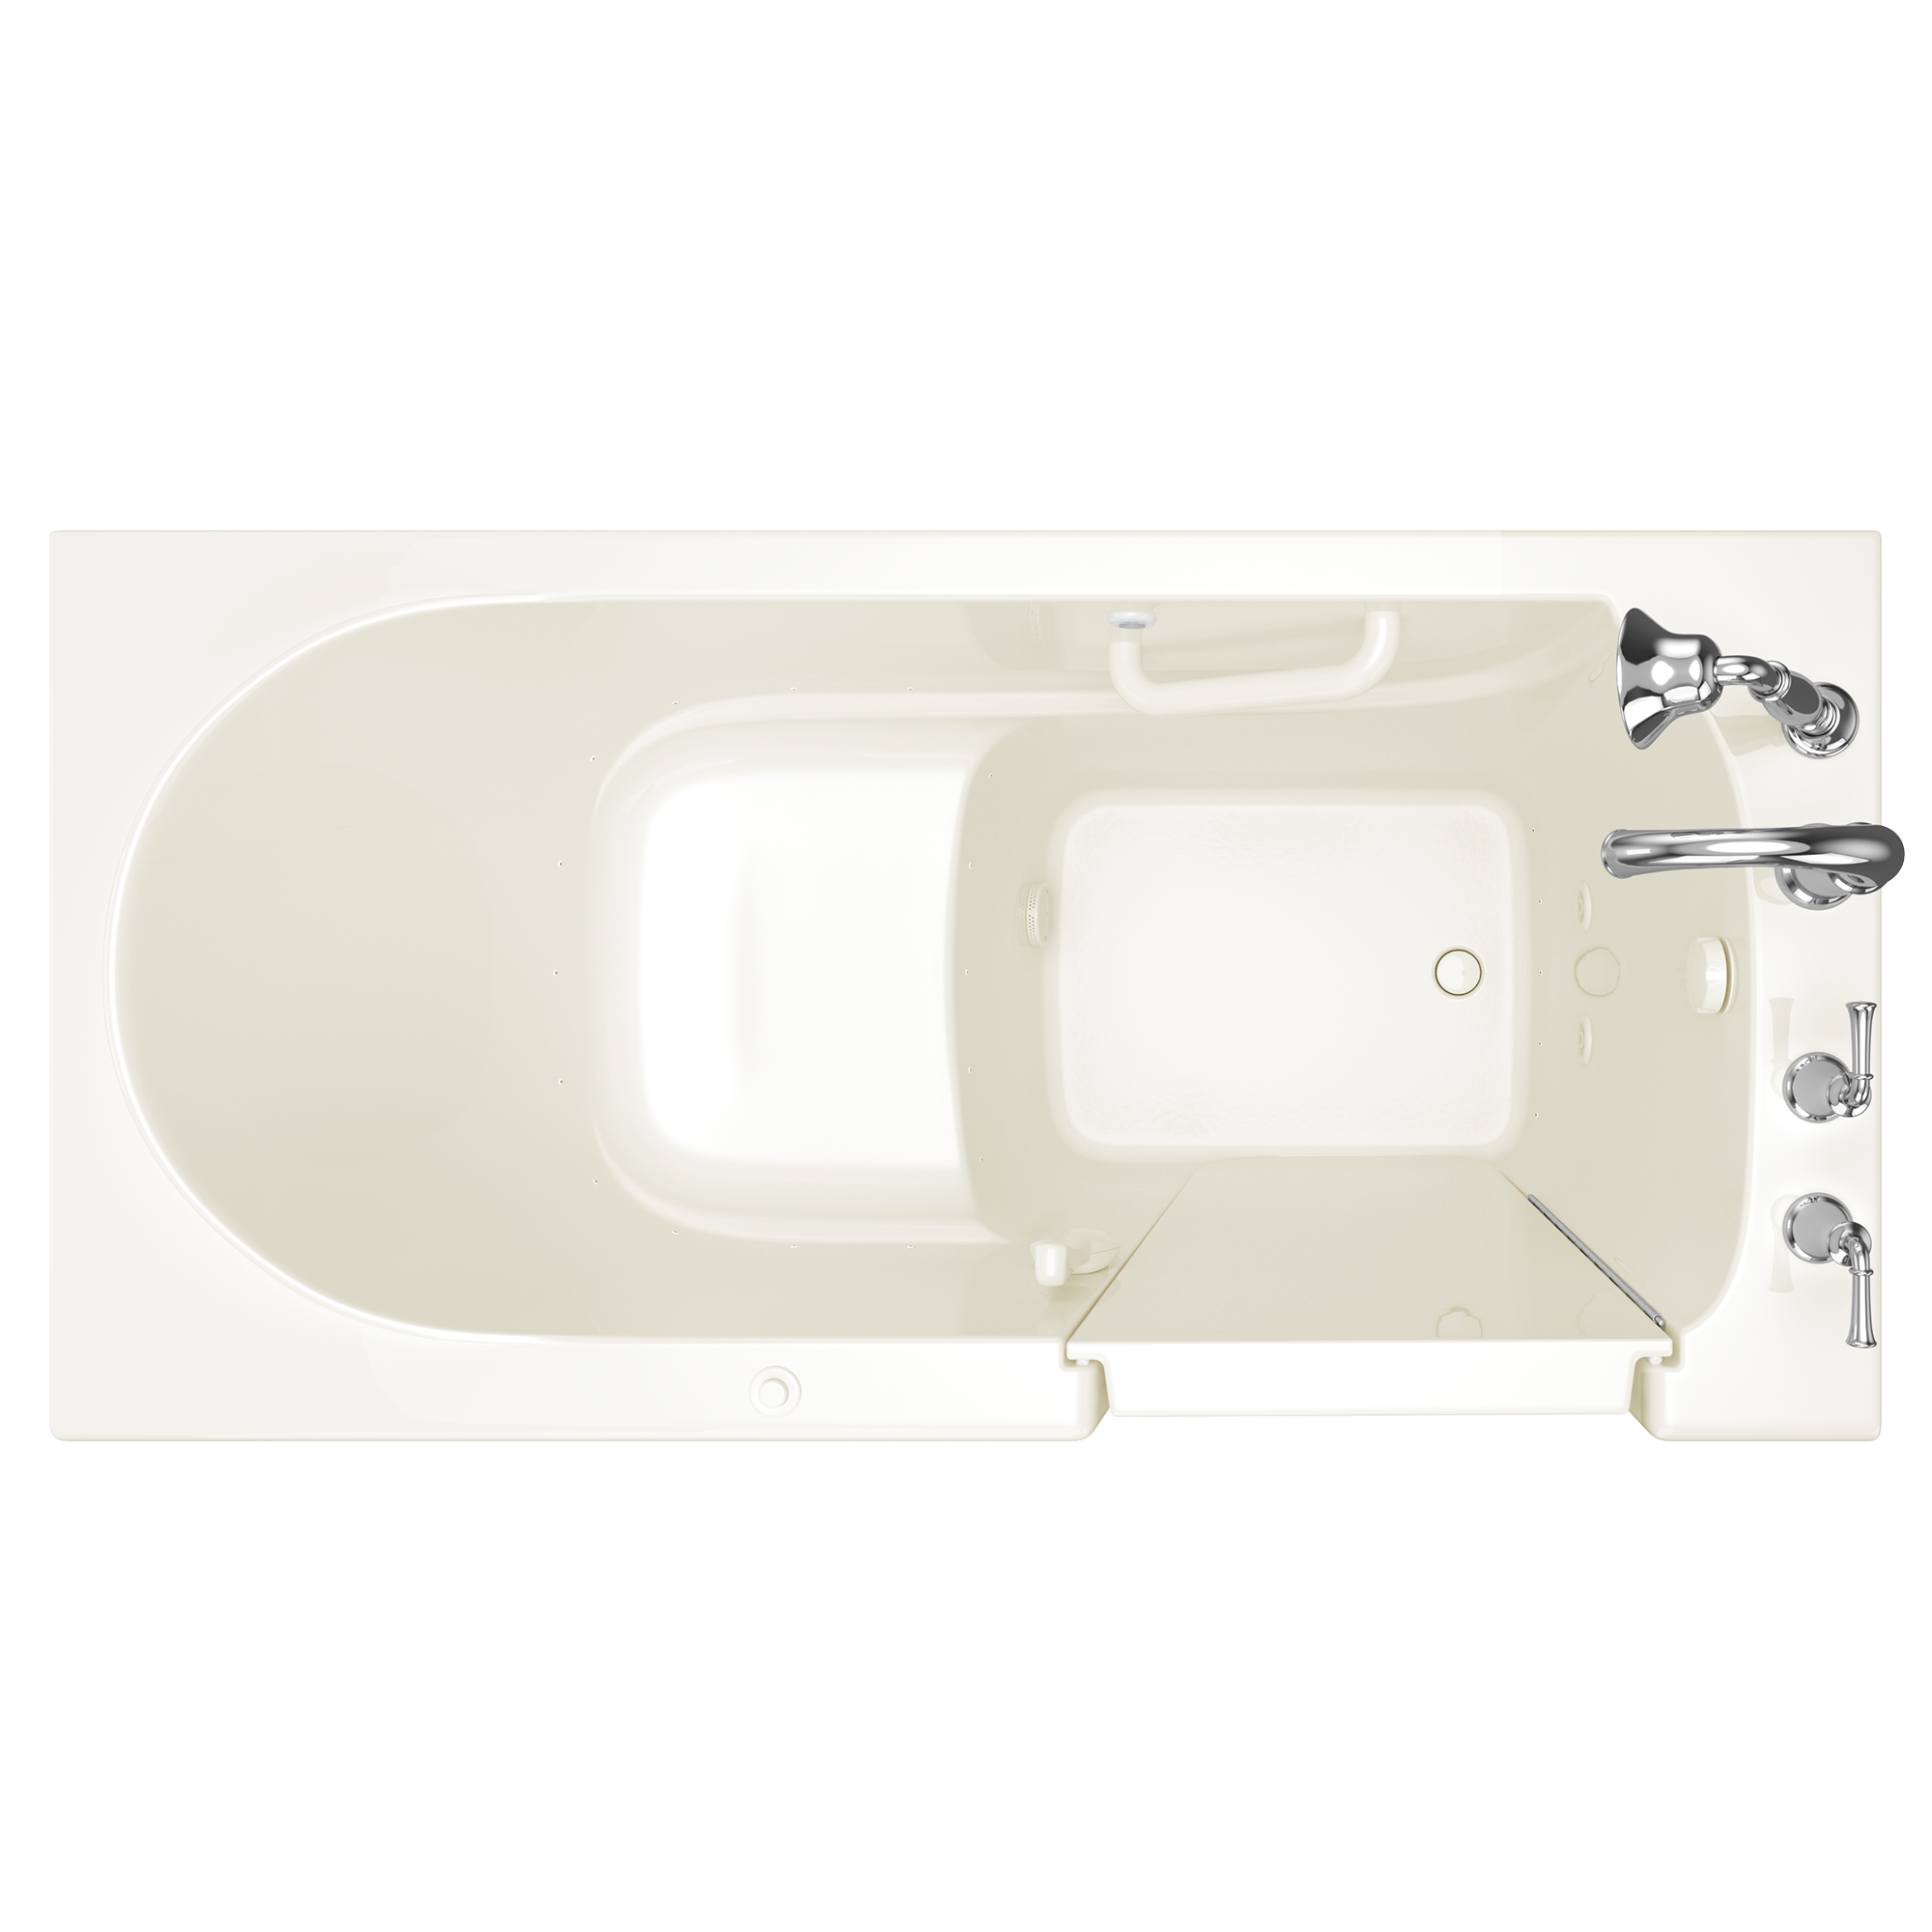 Gelcoat Value Series 30 x 60  Inch Walk in Tub With Air Spa System   Right Hand Drain With Faucet WIB LINEN